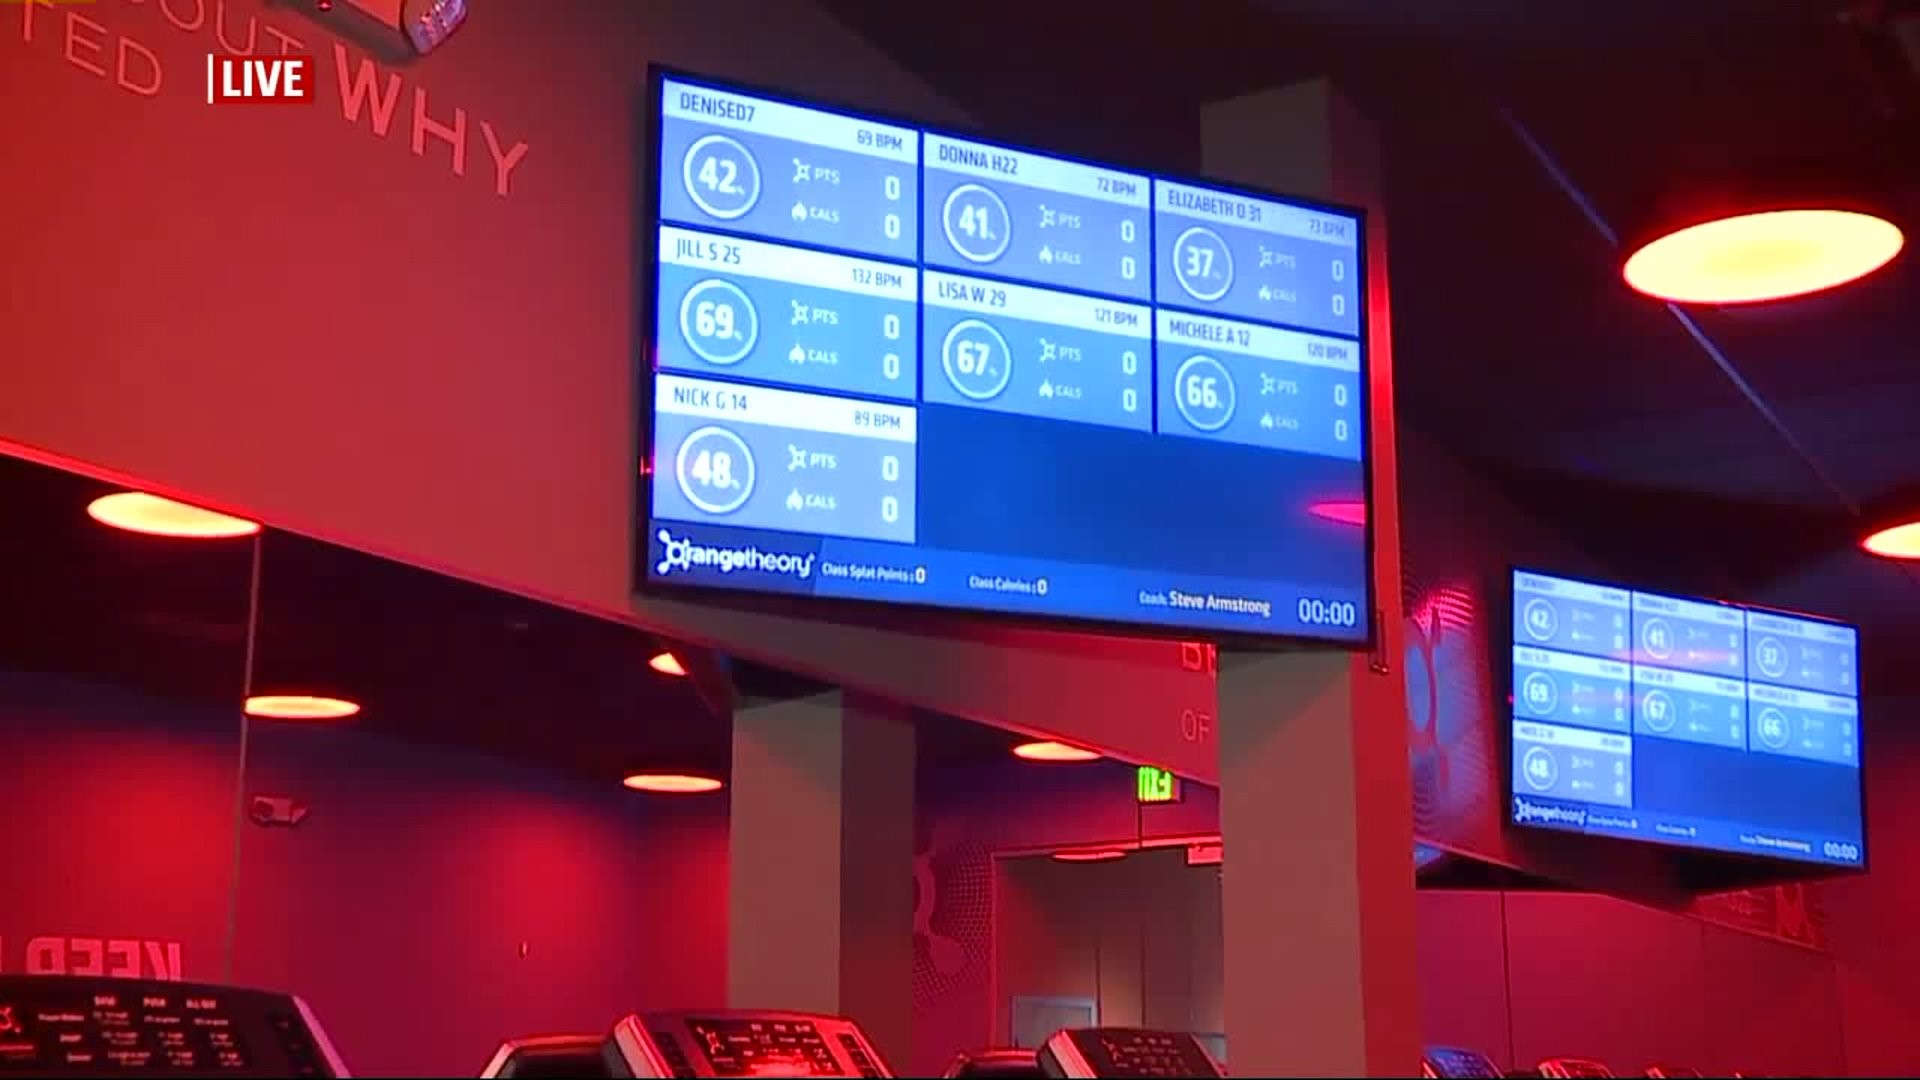 A new approach to achieving your fitness goals called Orangetheory Fitness just opened in the Lancaster Shopping Center on Lititz Pike